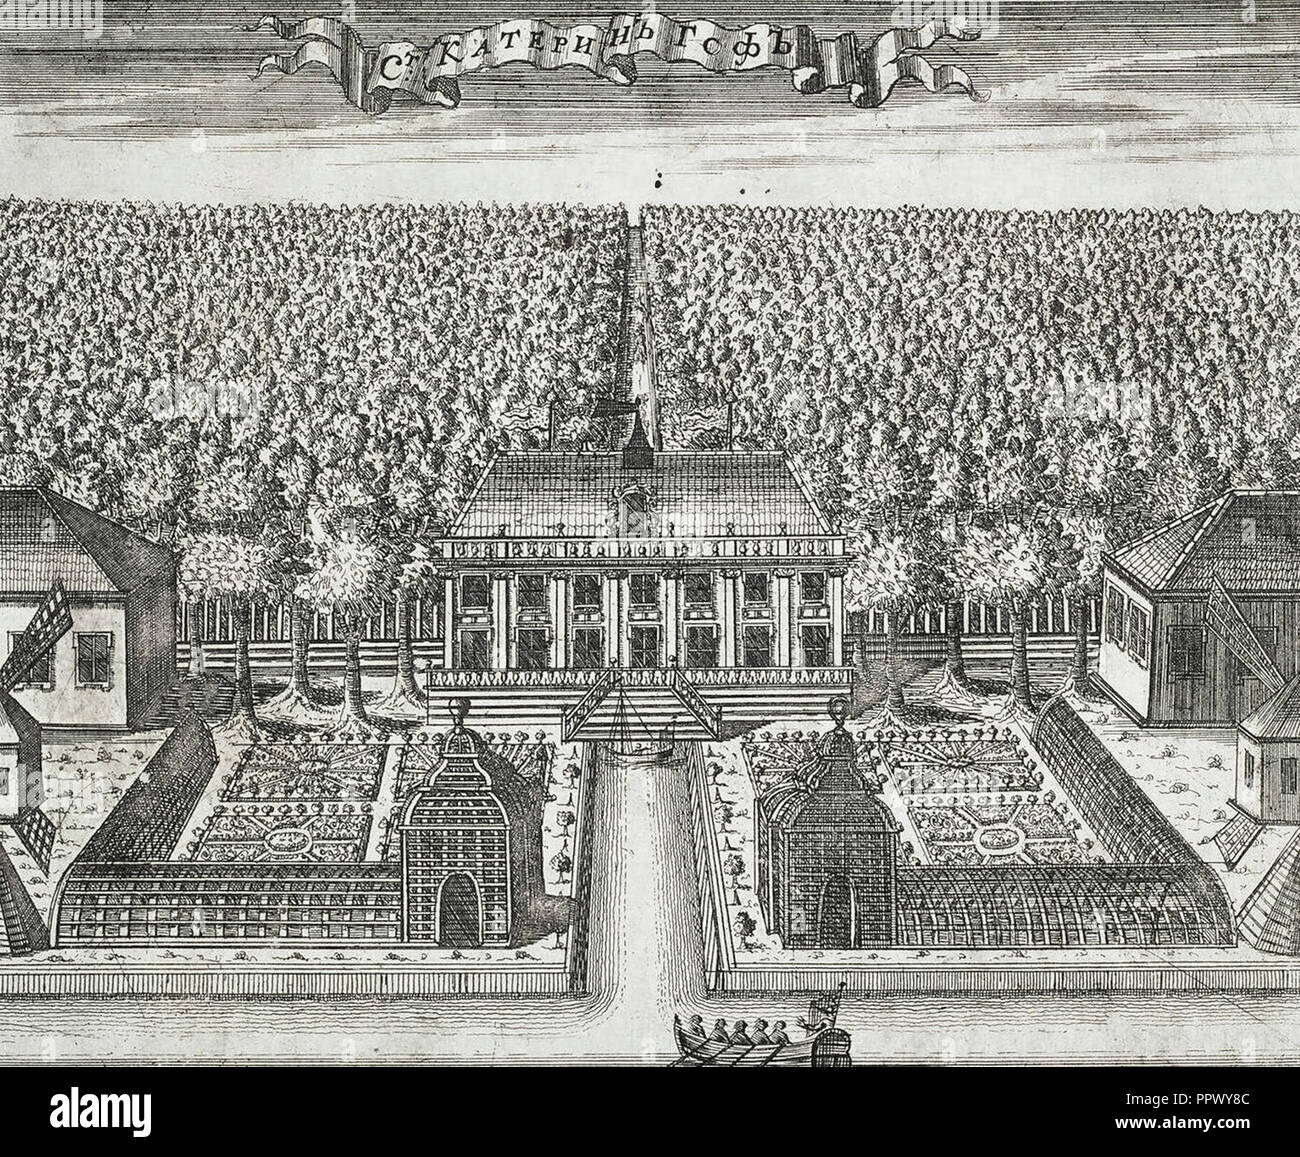 View of Catherinehof, Etching with line engraving, circa 1716. Ekaterinhof or Catherinehof is a historic district in the south-west of St Petersburg, Russia. Its name originated in 1711, when Peter the Great presented the Ekanerinhof Island and adjacent lands along the Ekateringofka River to his wife Catherine, whose name they memorialize. Stock Photo